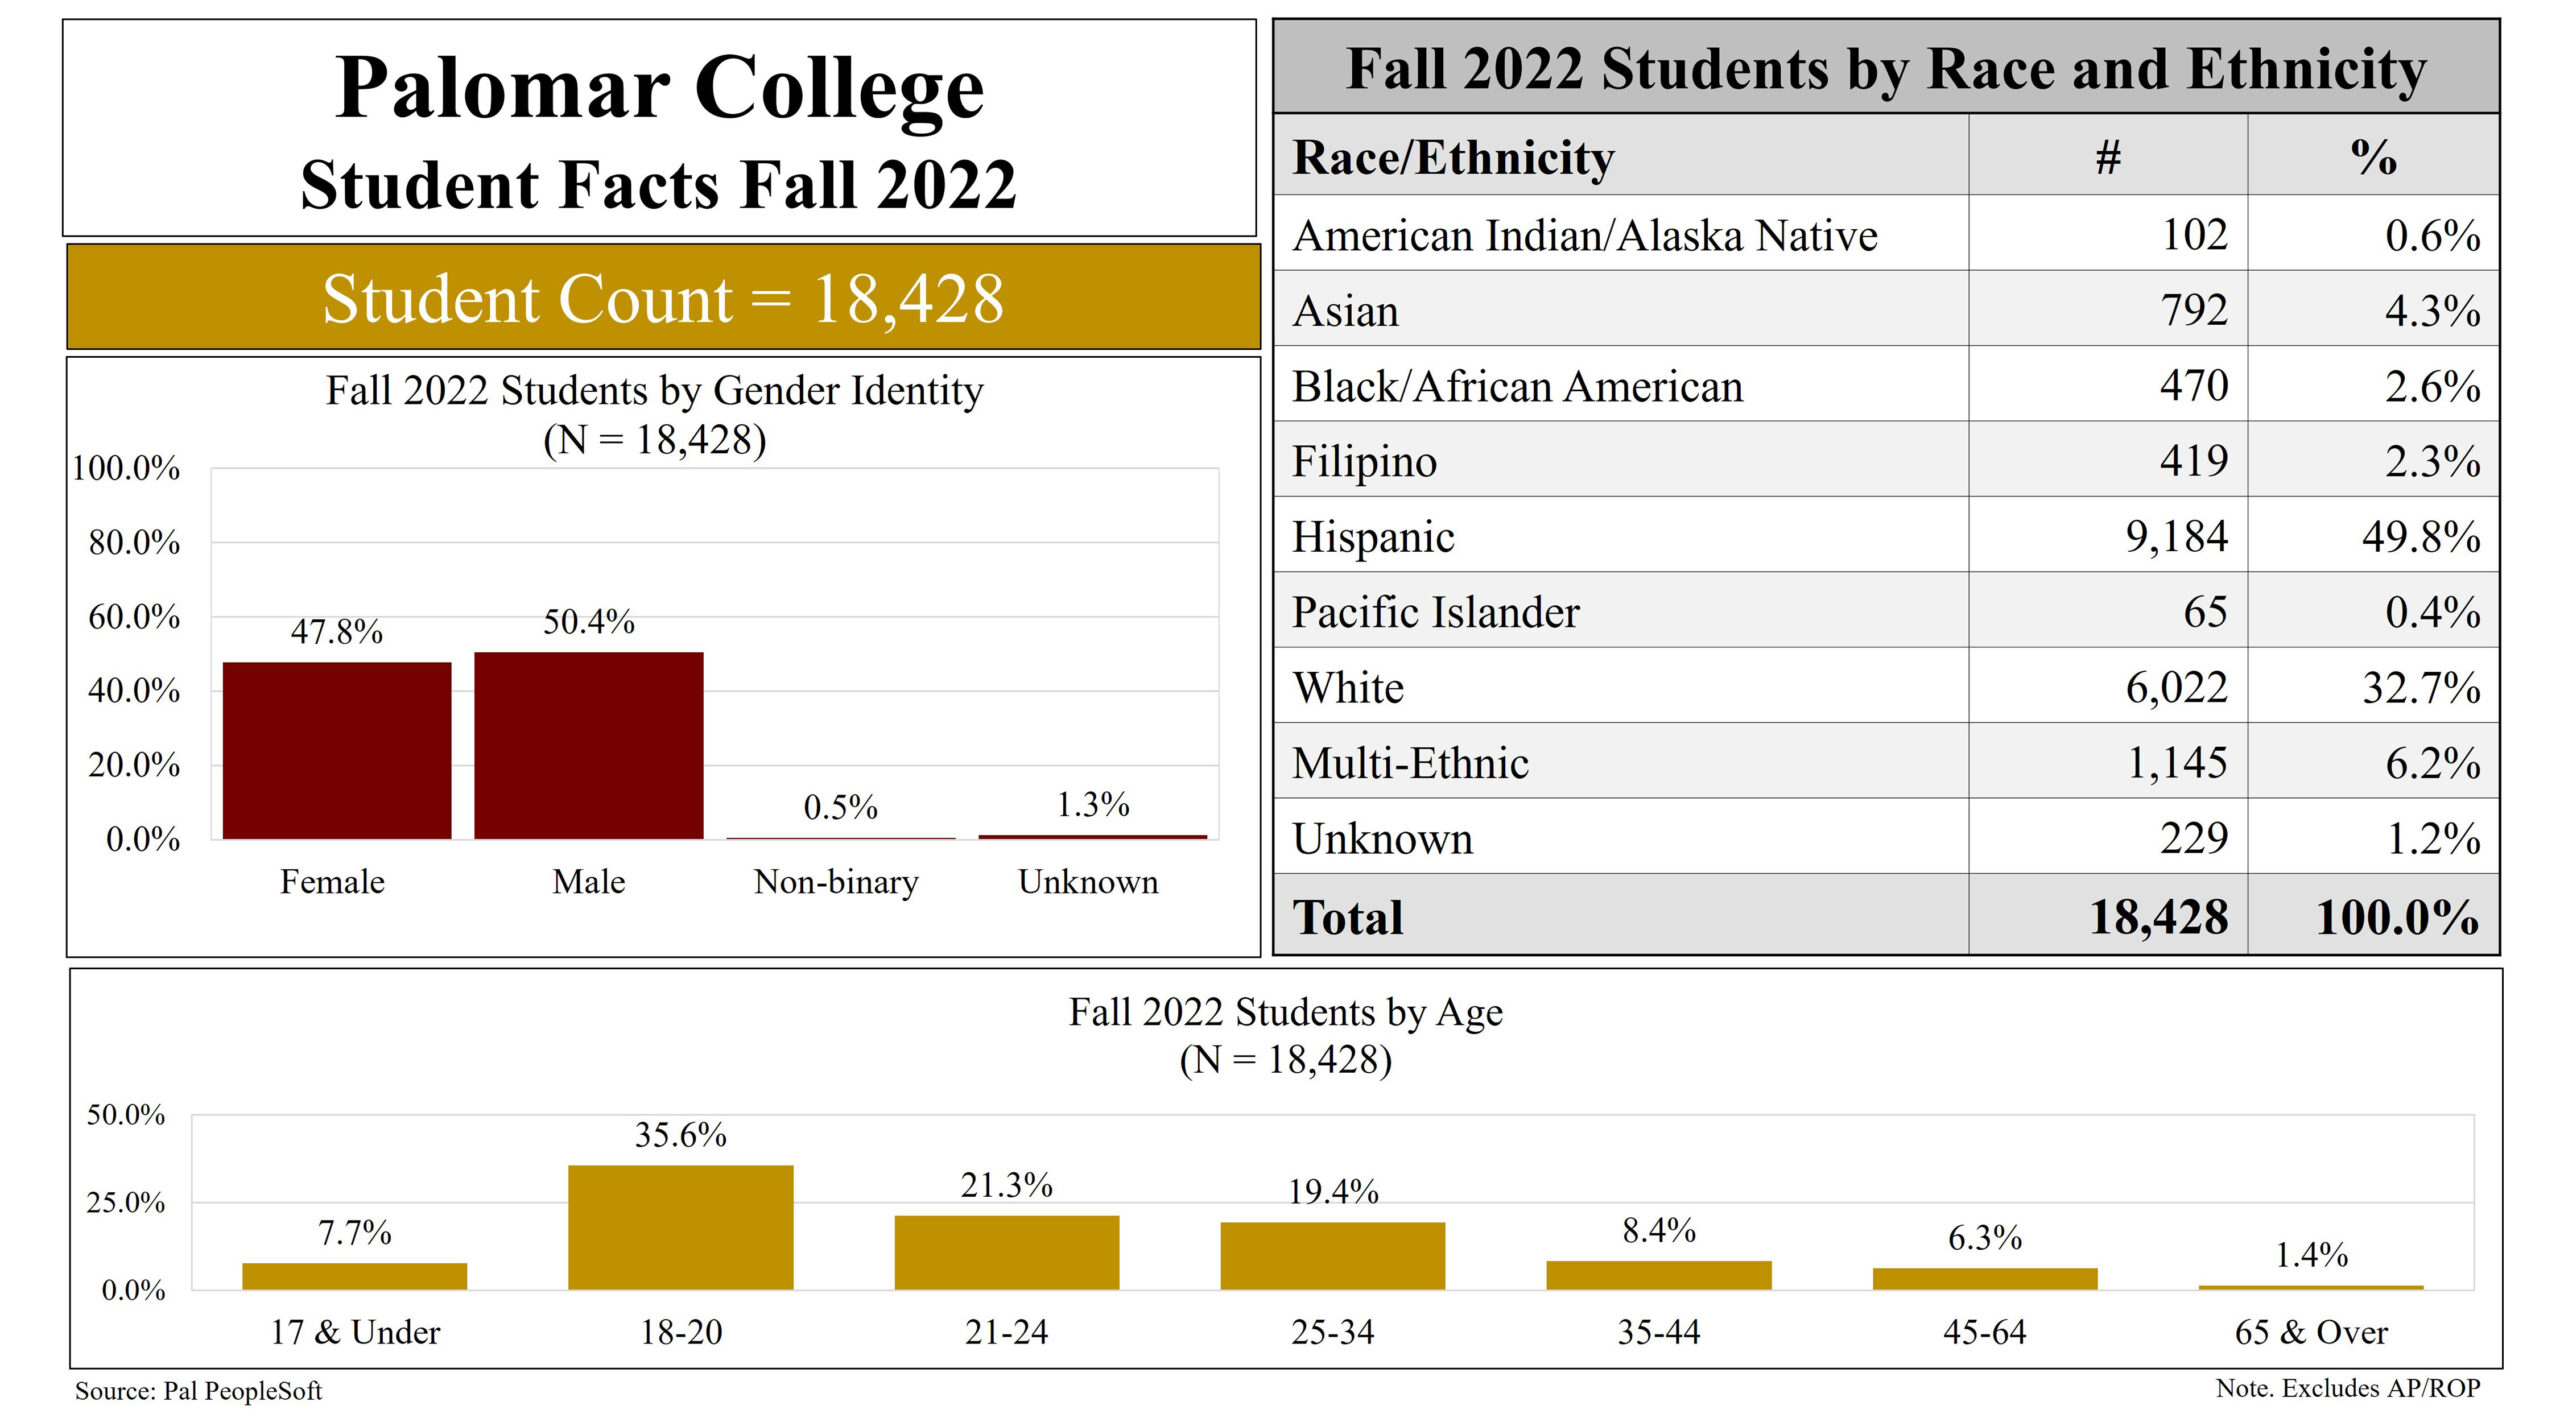 Presented Top to Bottom Banner: Palomar College Student Facts Fall 2022 Student Count = 18,428 Chart - Fall 2022 Students by Gender Identity Female 47.8% Male 50.4% Non-binary 0.5% Unknown 1.3% Table - Fall 2022 Students by Race and Ethnicity Race and Ethnicity # % American Indian/Alaska Native 102 0.6% Asian 792 4.3% Black/African American 470 2.6% Filipino 419 2.3% Hispanic 9,184 49.8% Pacific Islander 65 0.4% White 6,022 32.7% Multi Ethnic 1,145 6.2% Unknown 229 1.2% Total 18,428 100.0% Chart - Fall 2022 Students by Age Group Age Group % 17 & Under 7.7% 18-20 35.6% 21-24 21.3% 25-34 19.4% 35-44 8.4% 45-64 6.3% 65 & Over 1.4% Source: Pal PeopleSoft Note. Excludes AP/ROP